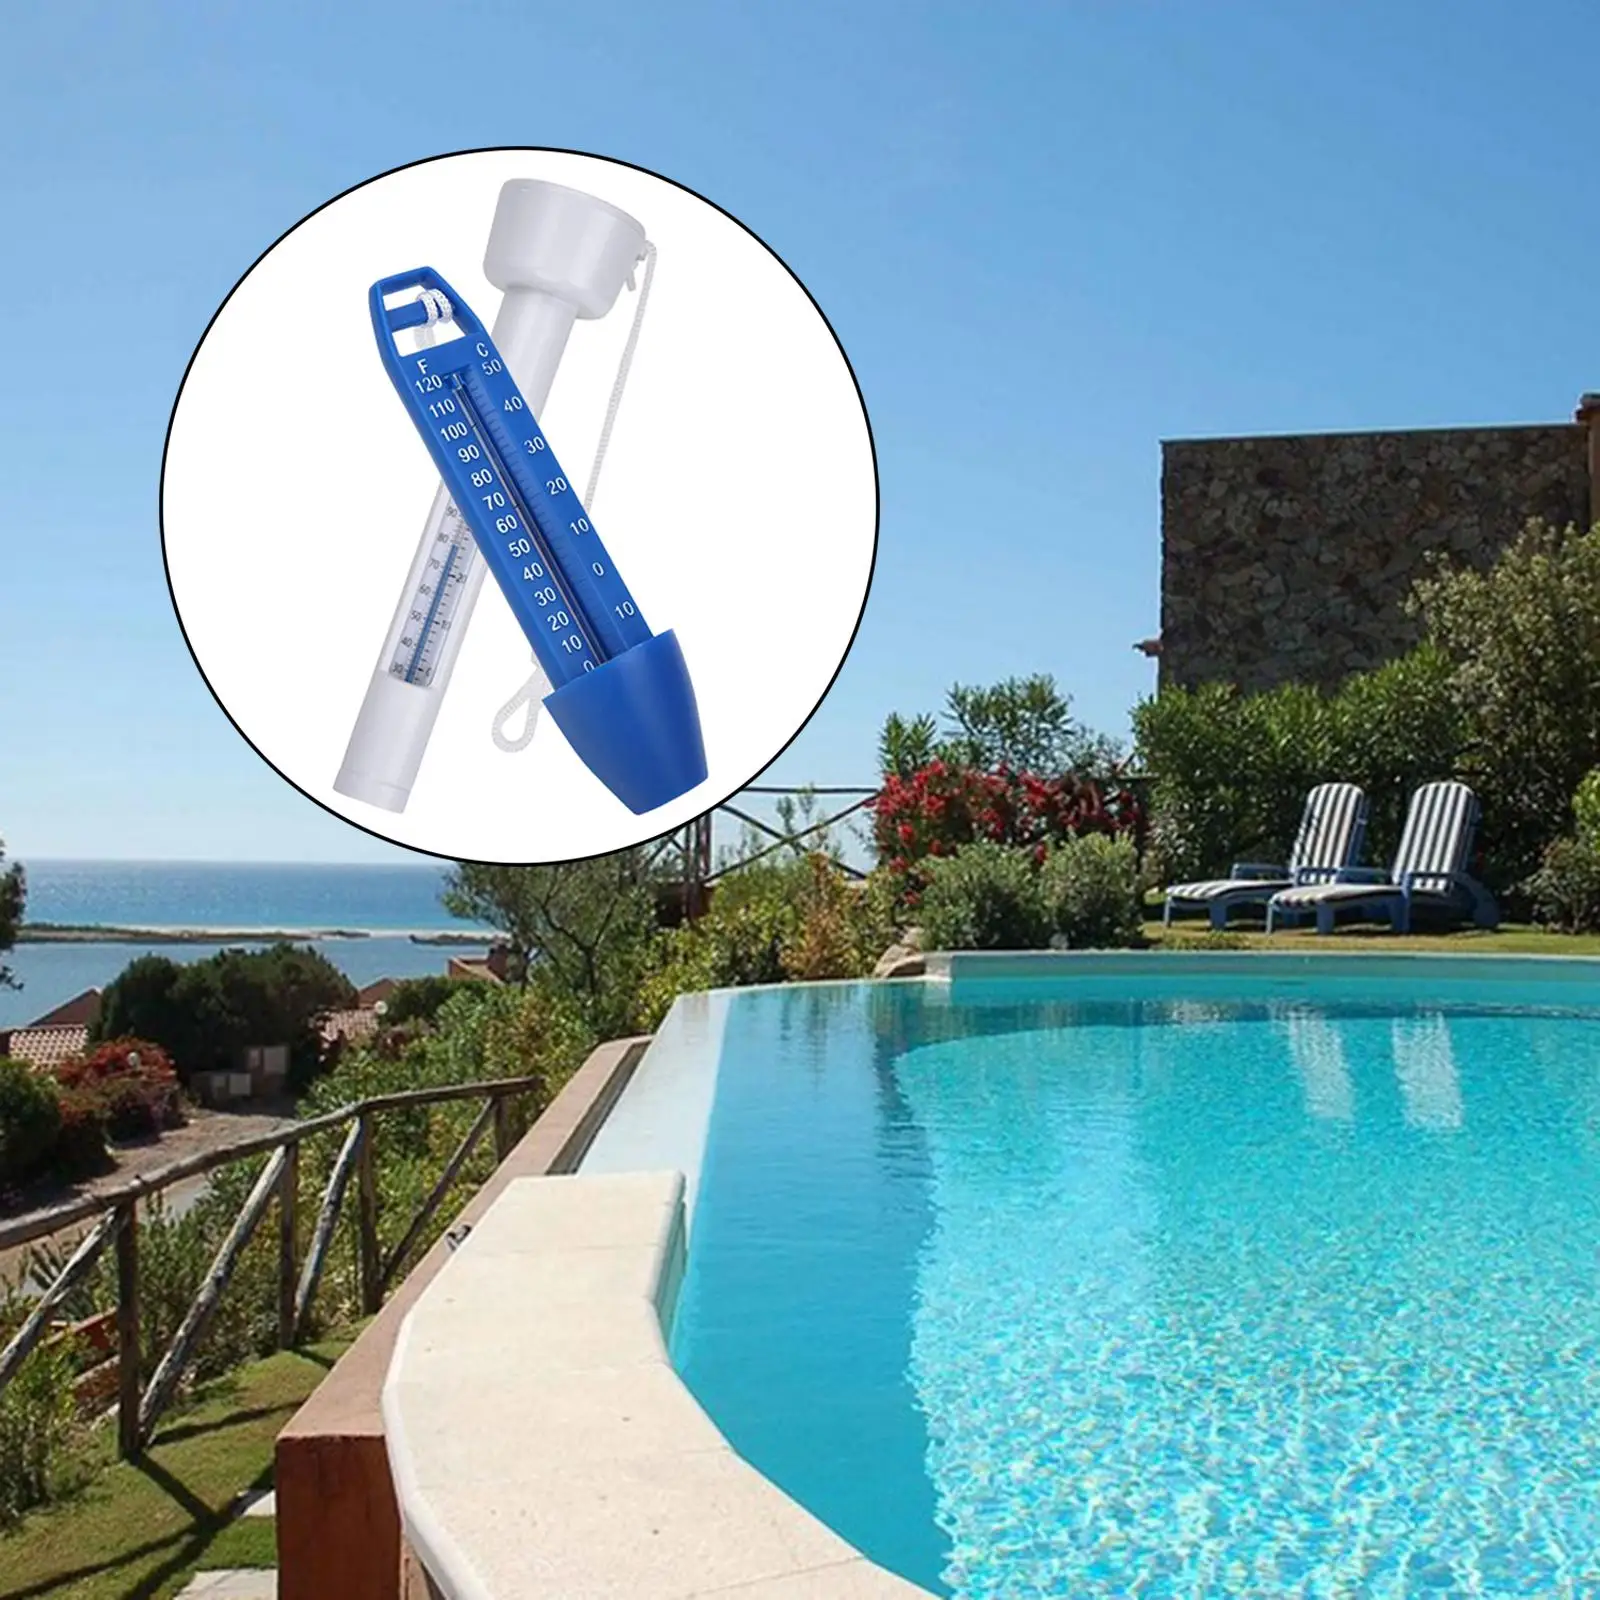 Pool  Floating , Easy to Read Water Temperature Measuring Tool for Swimming Pool, Pond, Spa, Hot Tub,  & Celsius